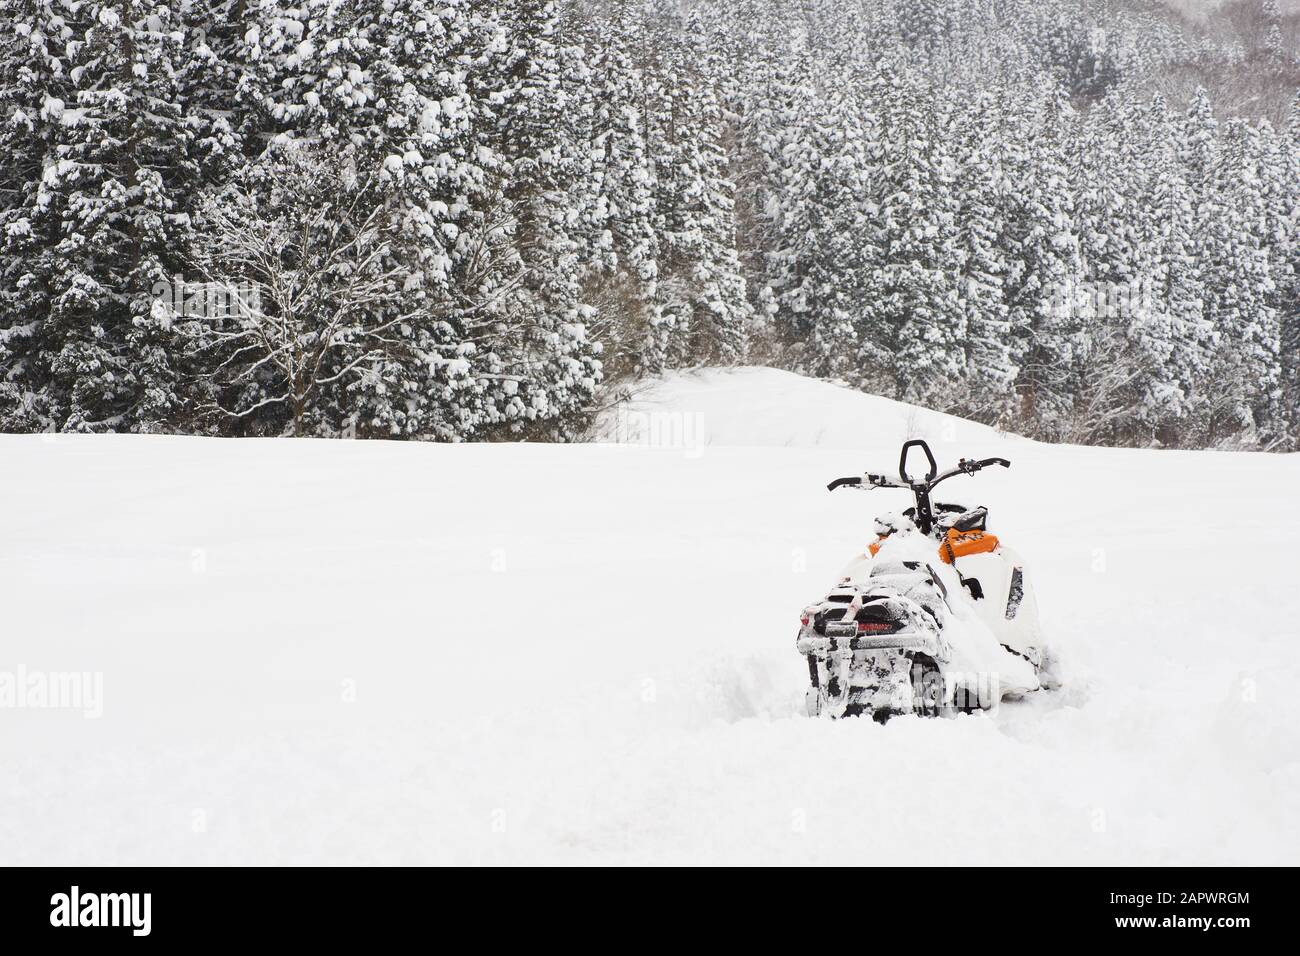 https://c8.alamy.com/comp/2APWRGM/a-snowmobile-snow-machine-motor-sled-motor-sledge-skimobile-snowscooter-sled-or-ski-doo-sits-atop-snow-with-trees-in-the-background-in-japan-2APWRGM.jpg